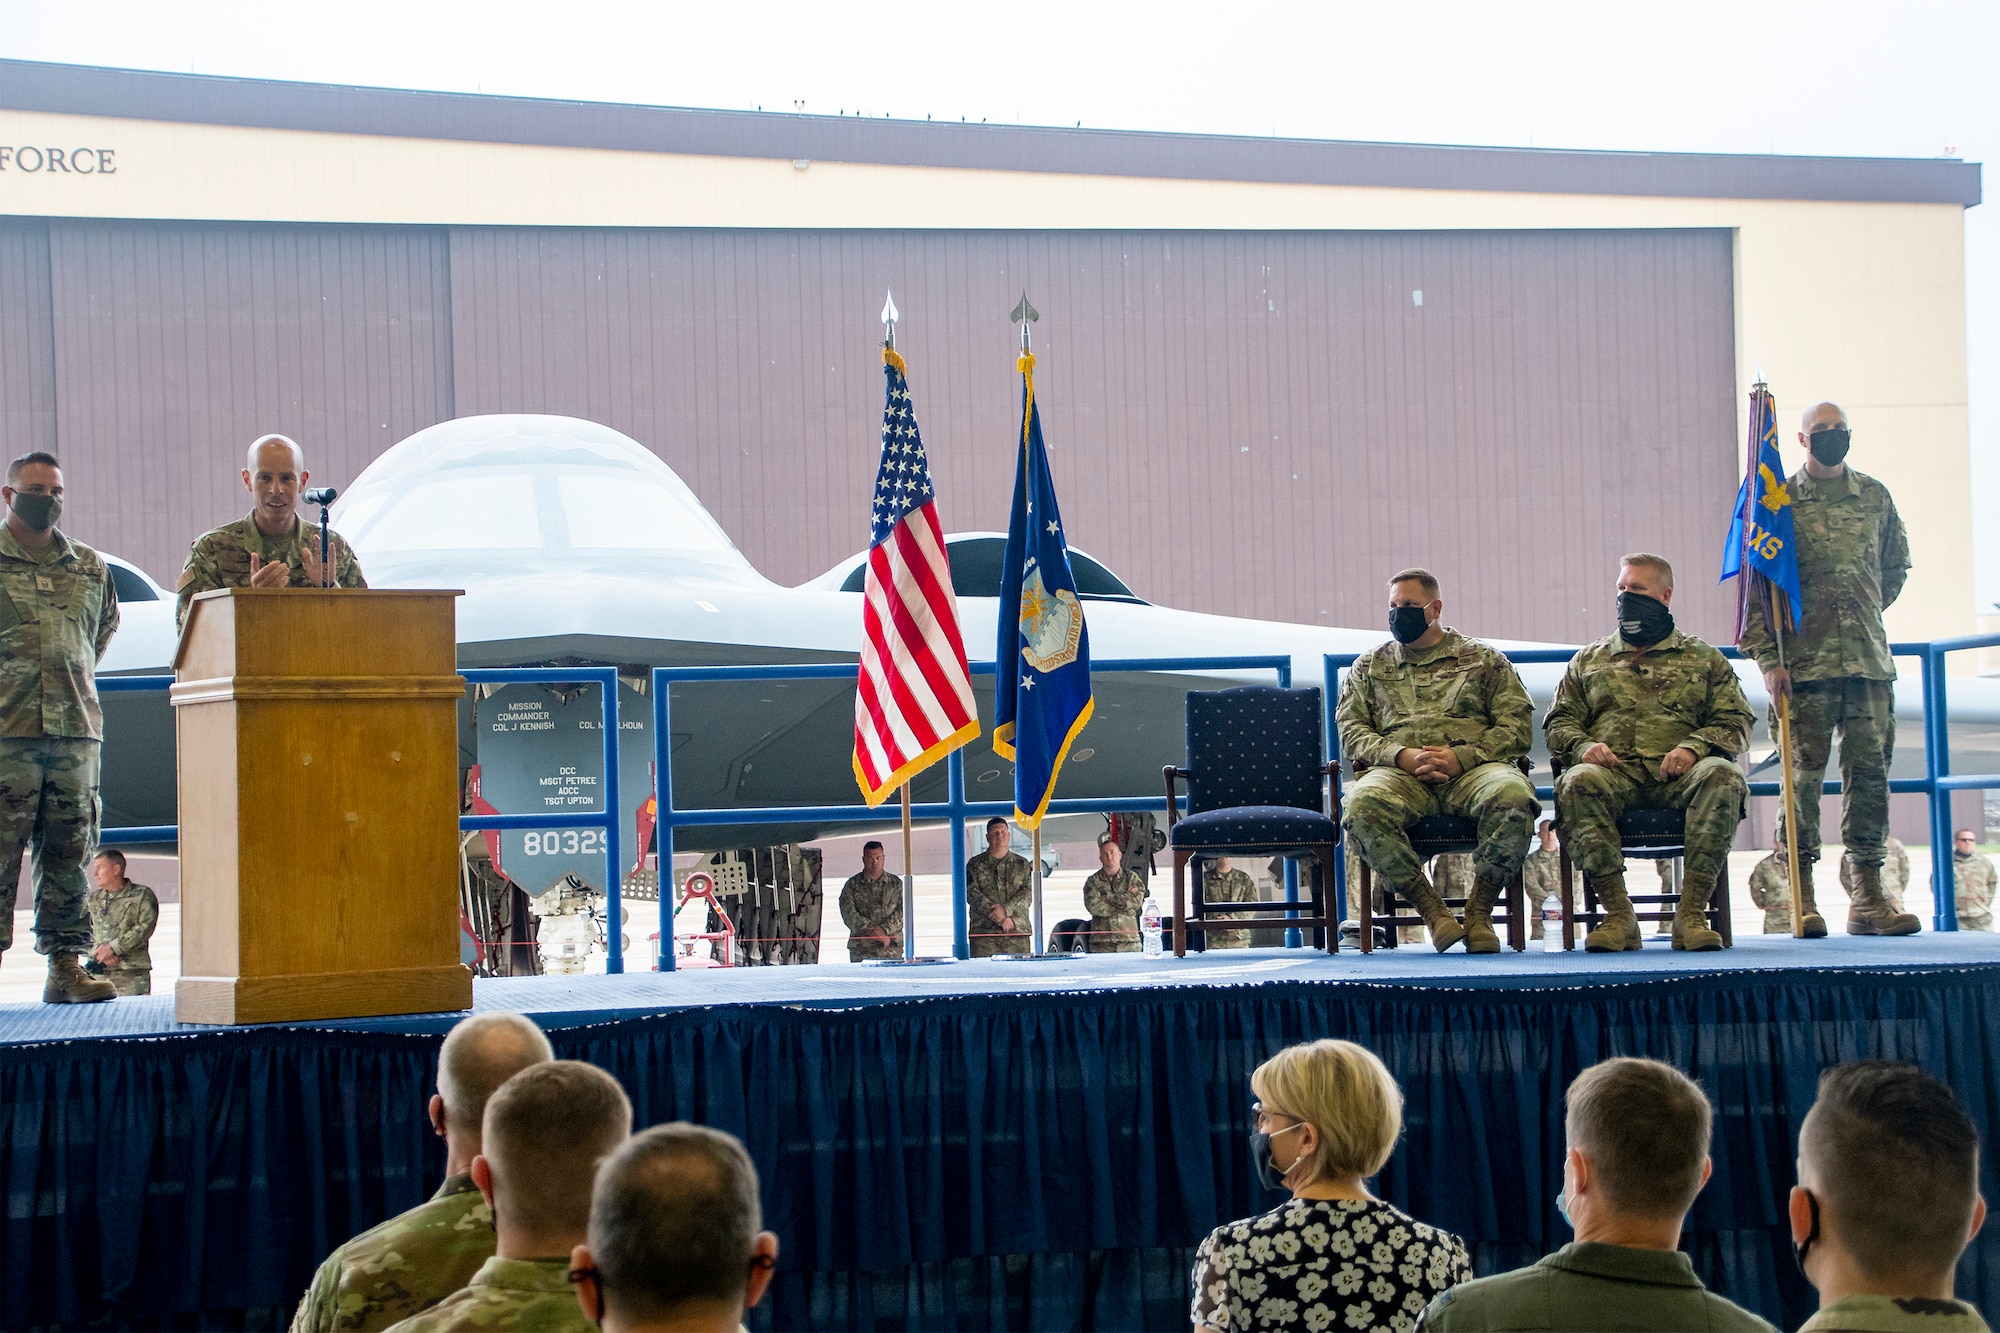 131st Bomb Wing Commander Col. Matthew Calhoun delivers remarks during a change of command ceremony for the 131st Maintenance Group Oct. 2, 2021 at Whiteman Air Force Base, Missouri. Outgoing Group Commander Col. Michael Belardo was relieved by Lt. Col. Chad Larson. (U.S. Air National Guard photo by Staff Sgt. Joshua Colligan)